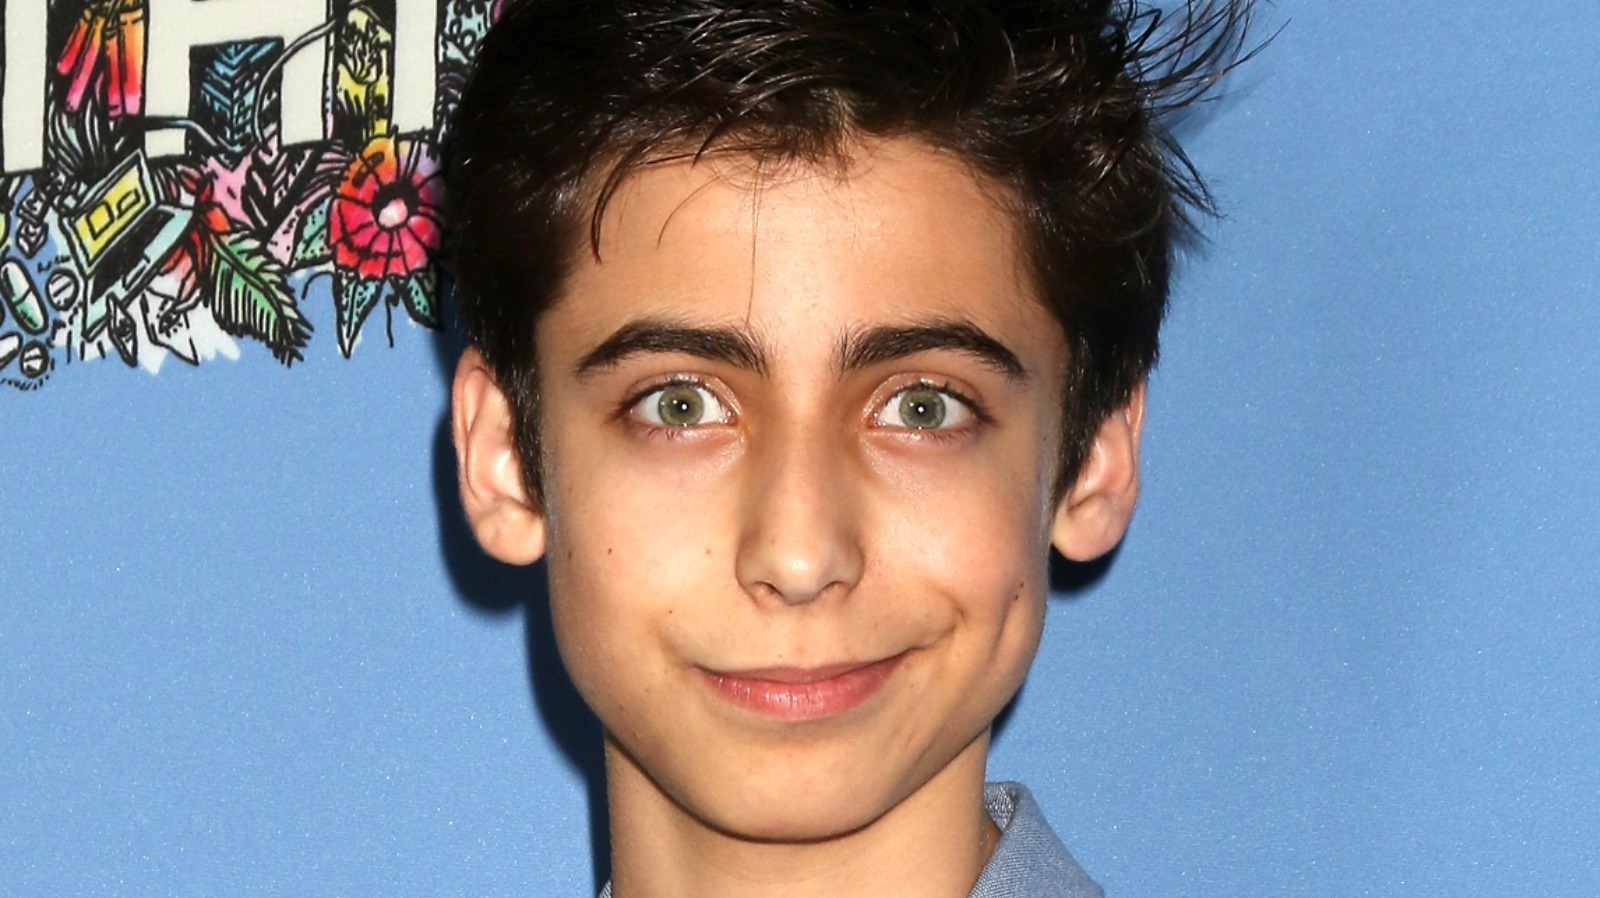 The Major Role Umbrella Academy Fans Want To See Aidan Gallagher Take